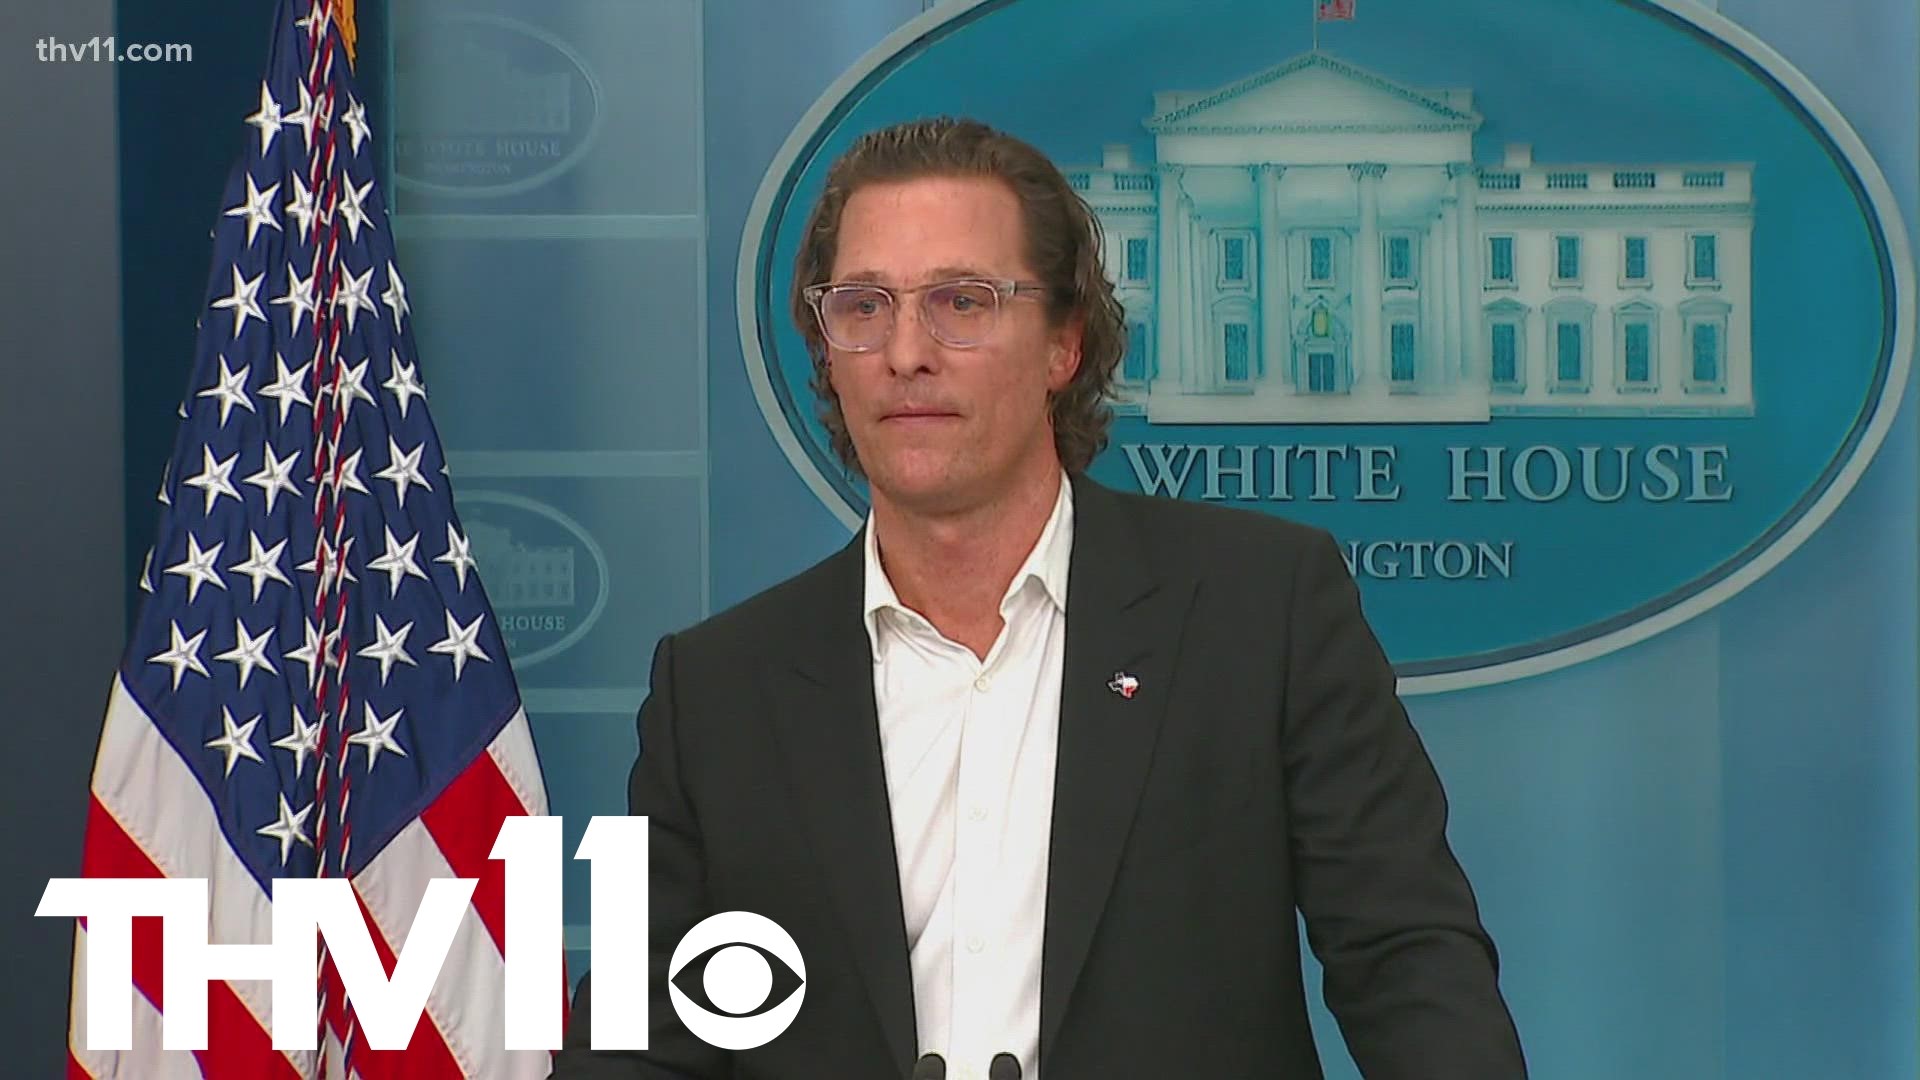 Actor Matthew McConaughey and Uvalde, Texas native, spoke at a White House press briefing on Tuesday urging lawmakers to implement change regarding current gun laws.